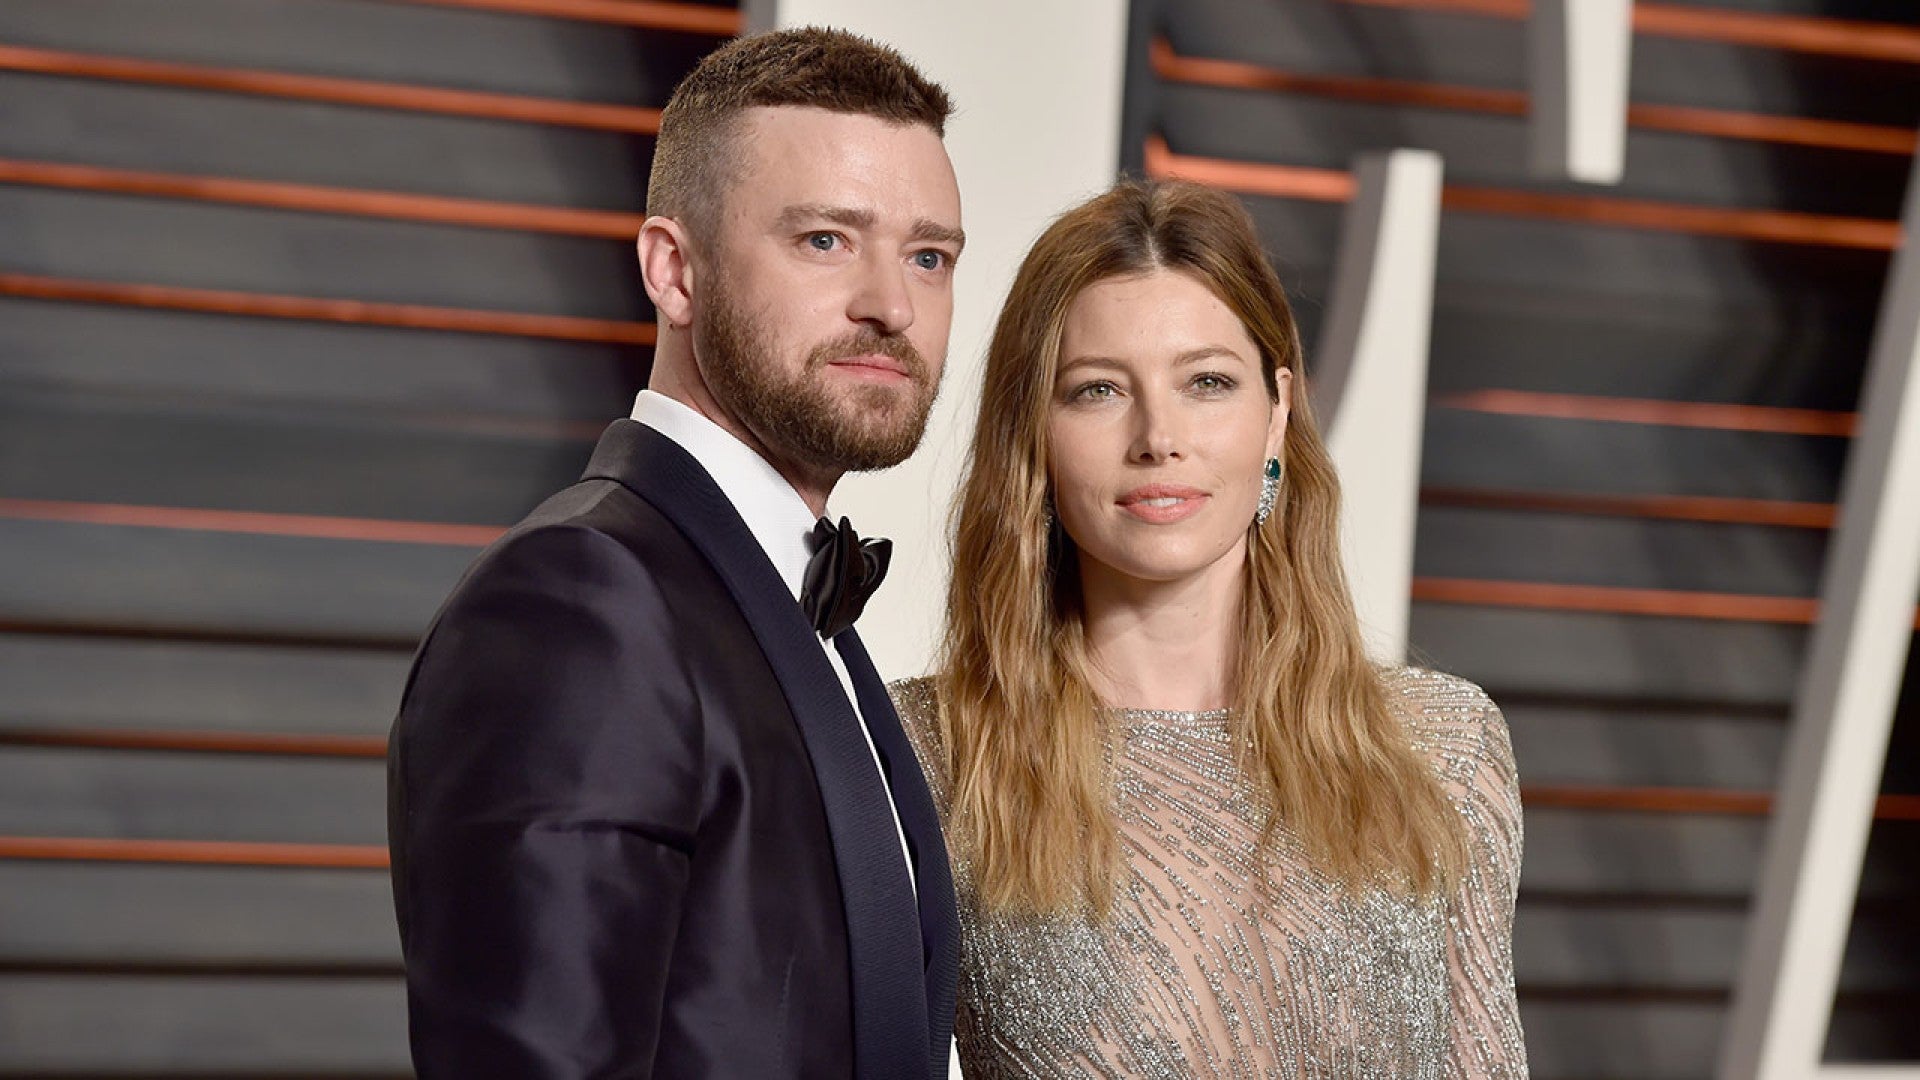 Justin Timberlake calls wife Jessica Biel a 'MILF' in Mother's Day  Instagram post – New York Daily News